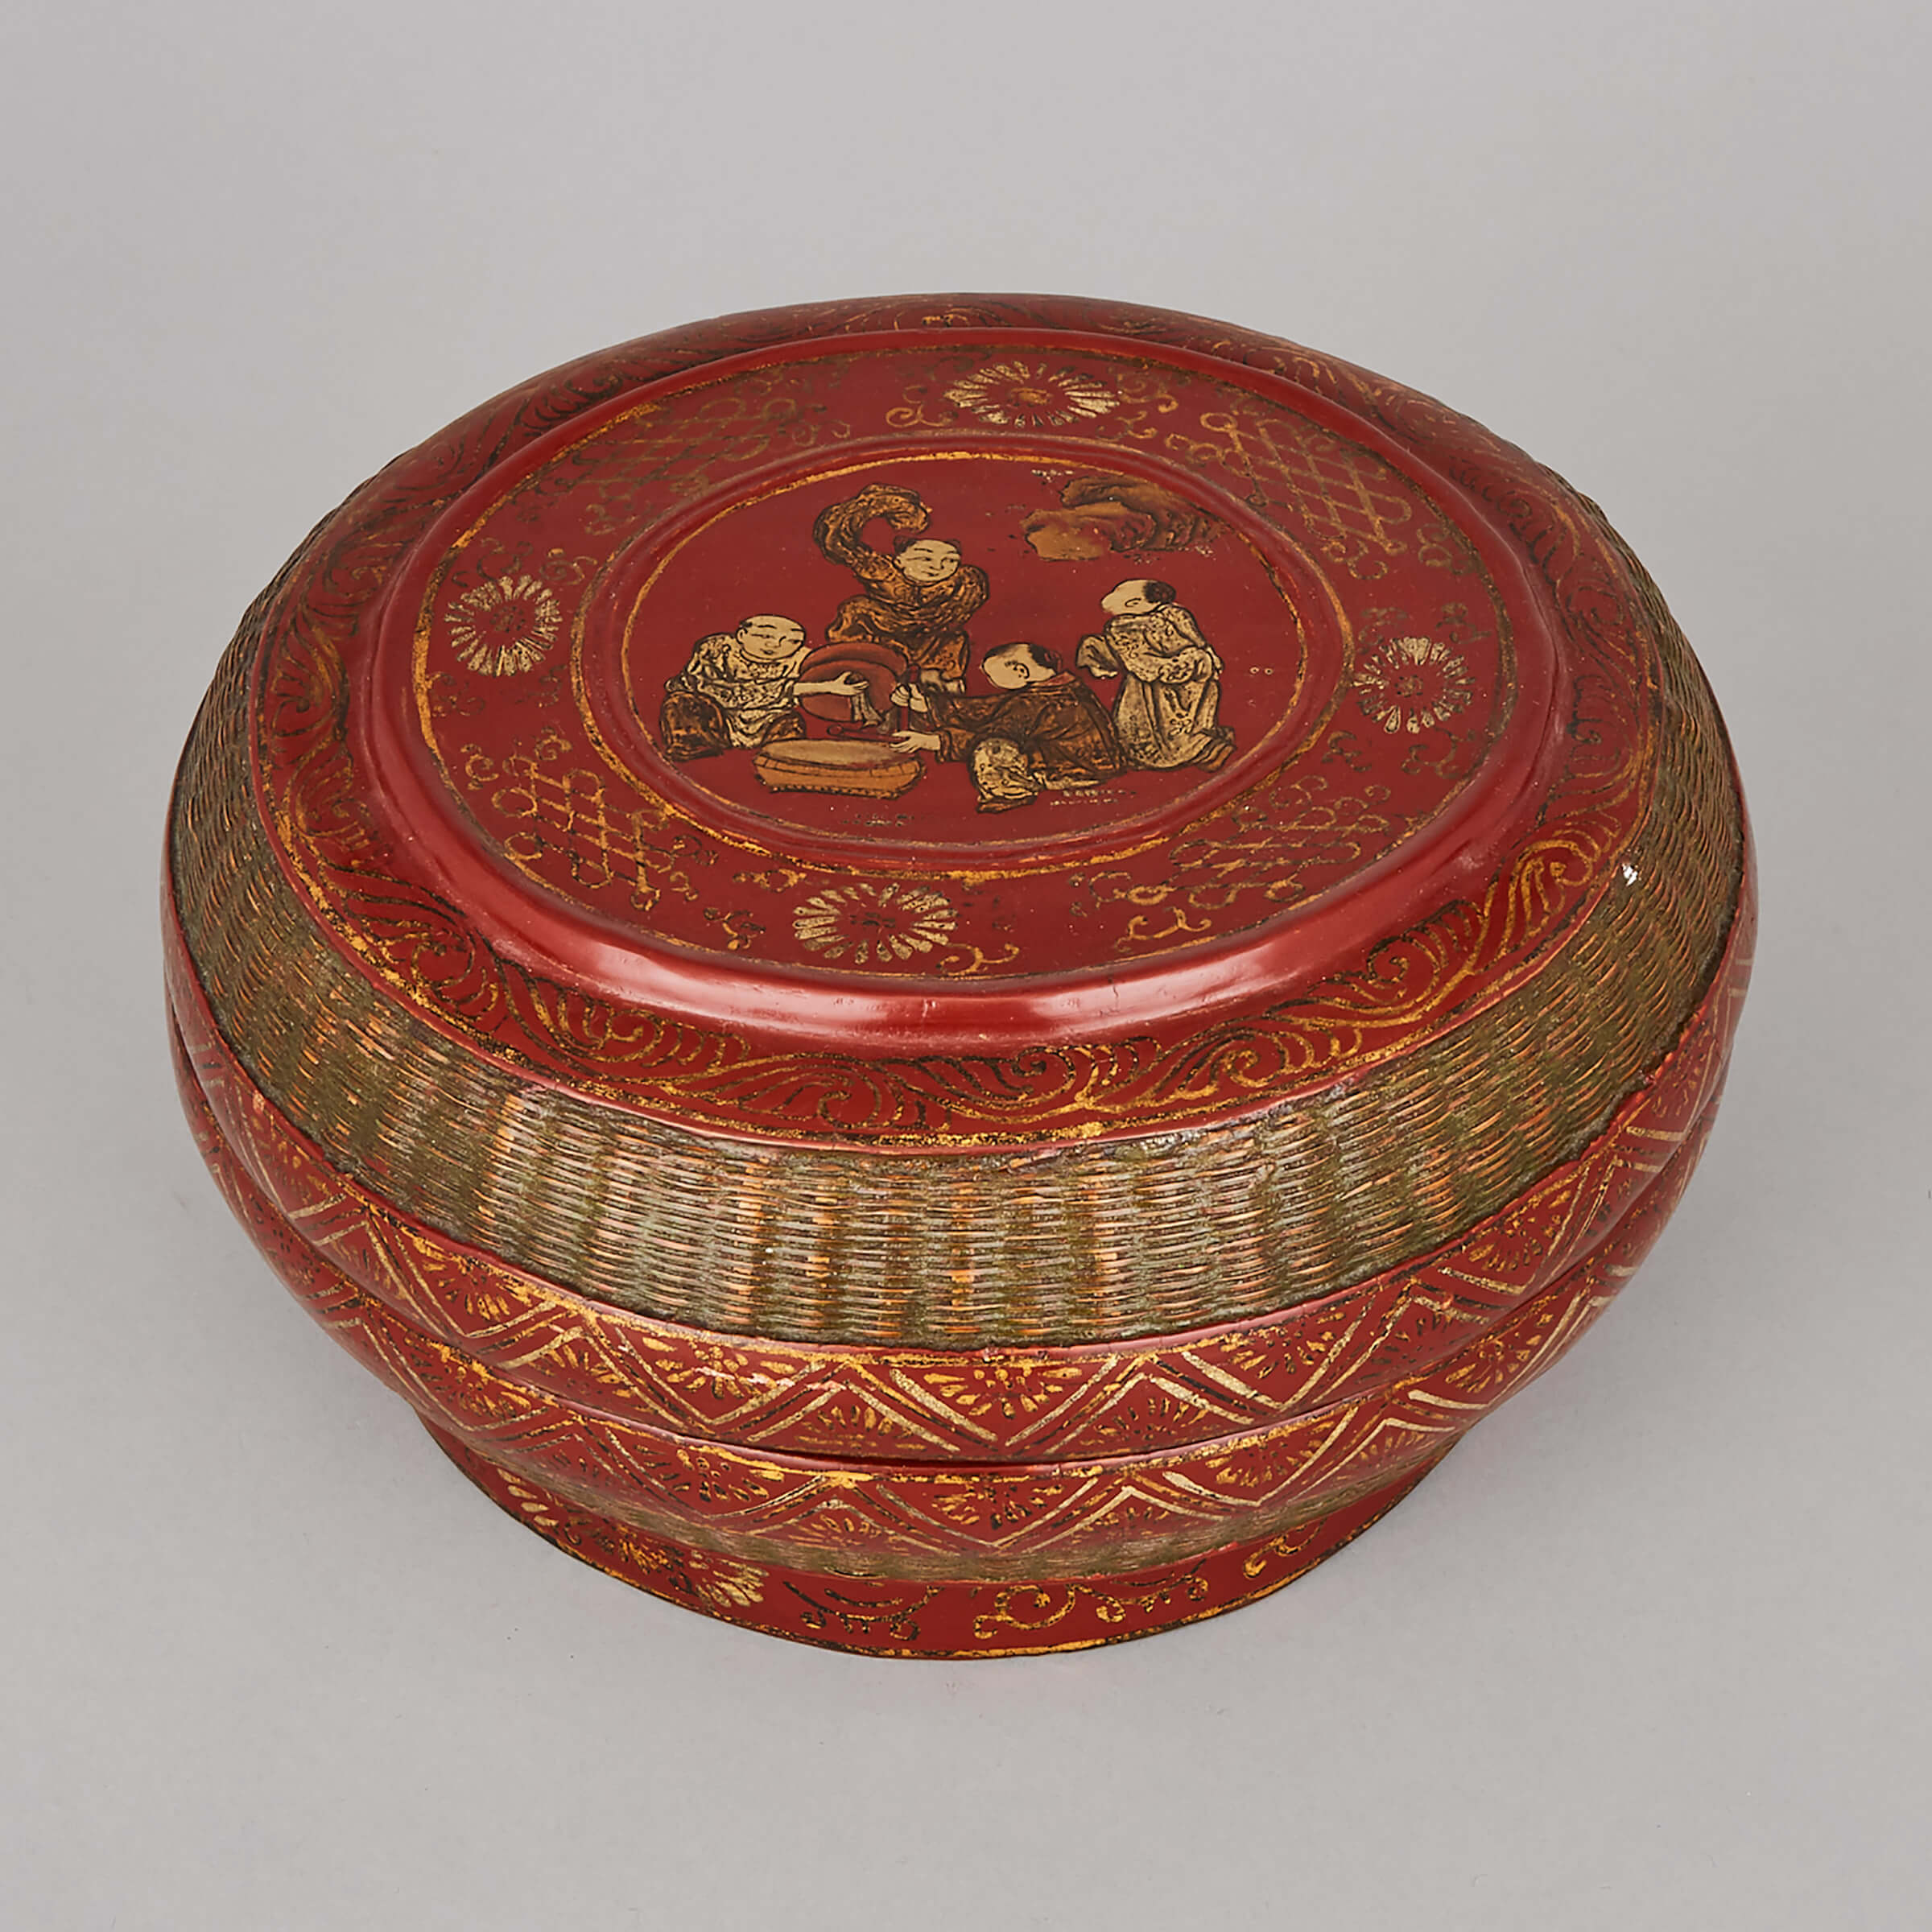 A Large Circular Lacquer Box, Early 20th Century